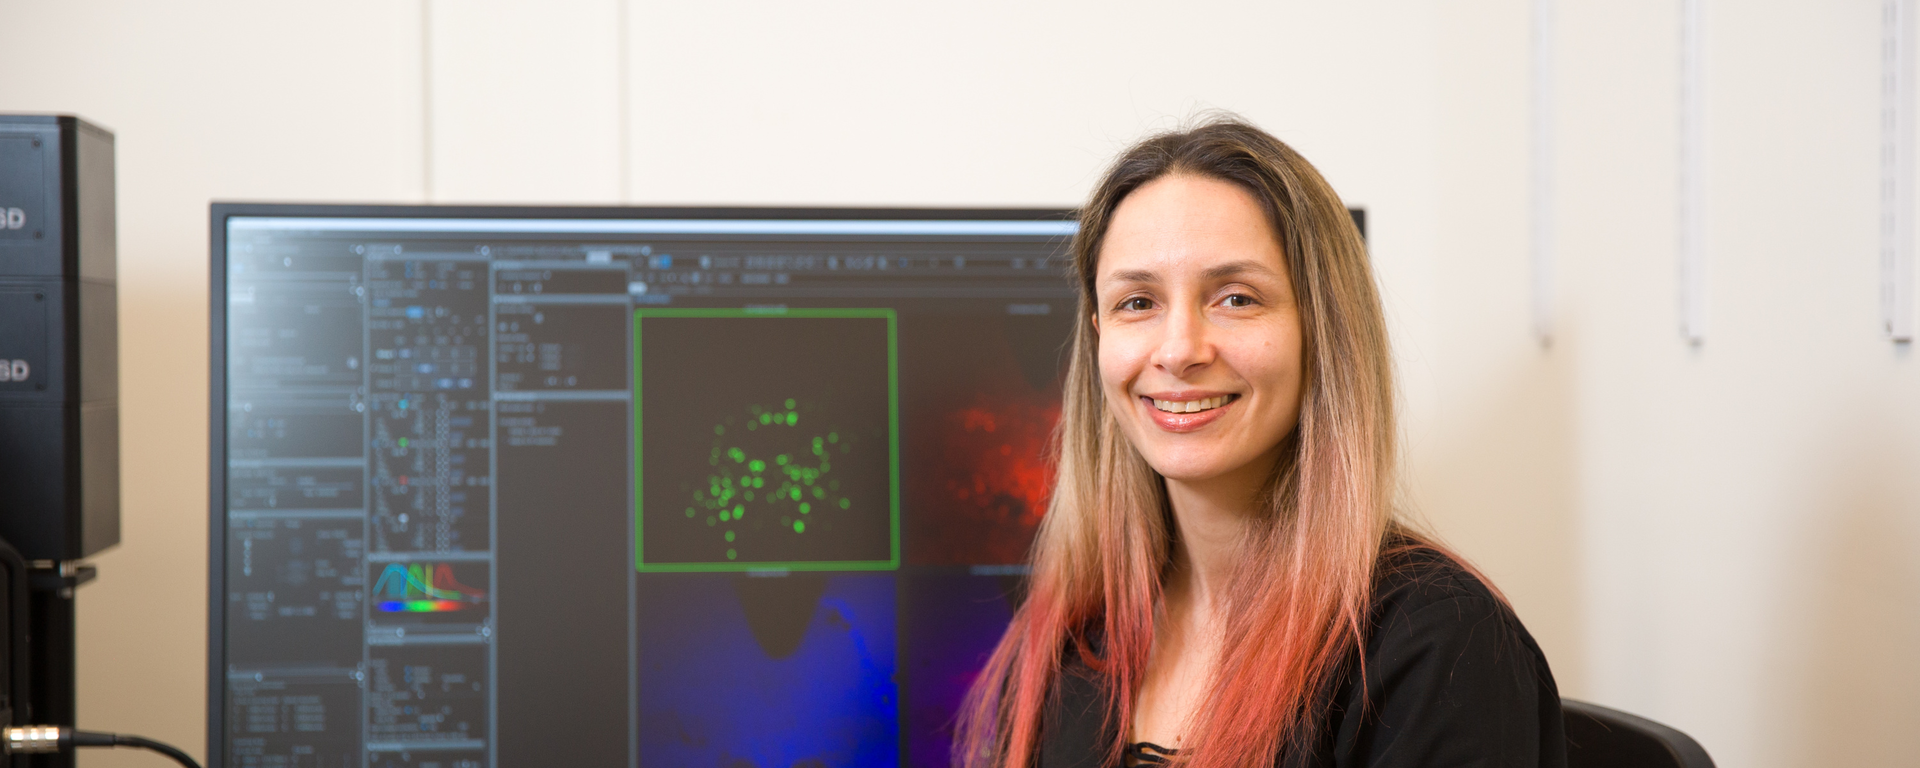 Dr. Derya Sargin, Assistant Professor in the Department of Psychology, sits in front of a computer showing graphs related to her research on brains and stress